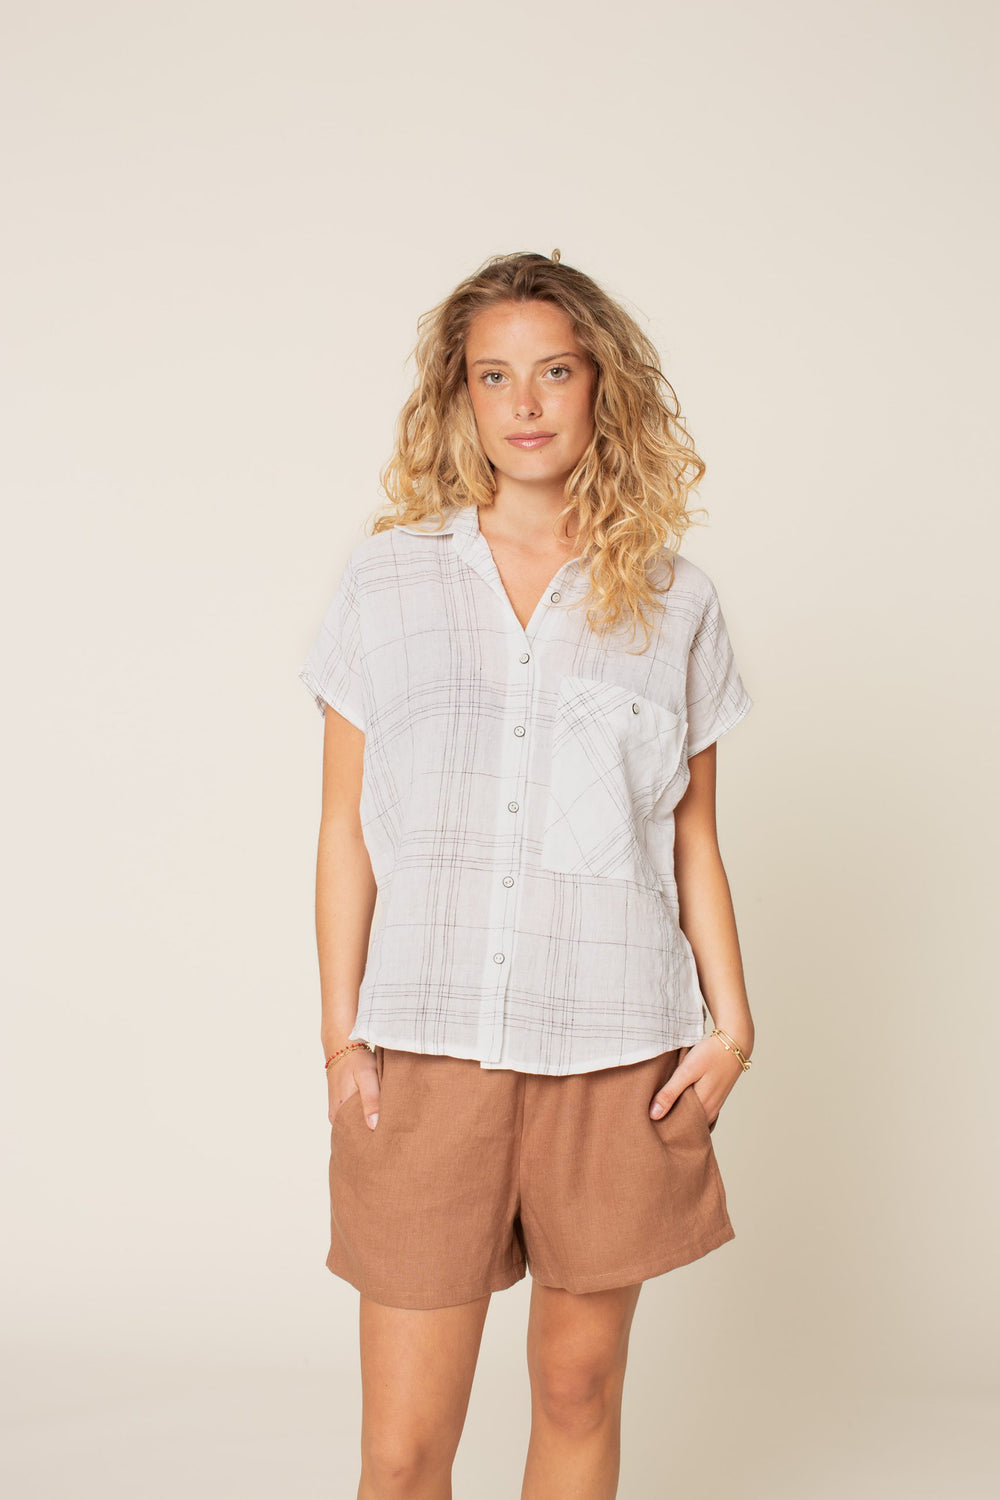 Woman wearing the Boxy Shirt sewing pattern from Wardrobe by Me on The Fold Line. A shirt pattern made in cotton voile, linen, poplin, or chambray fabrics, featuring a boxy fit, grown-on dropped shoulders, side seam and shoulder seam slits, collar and sta